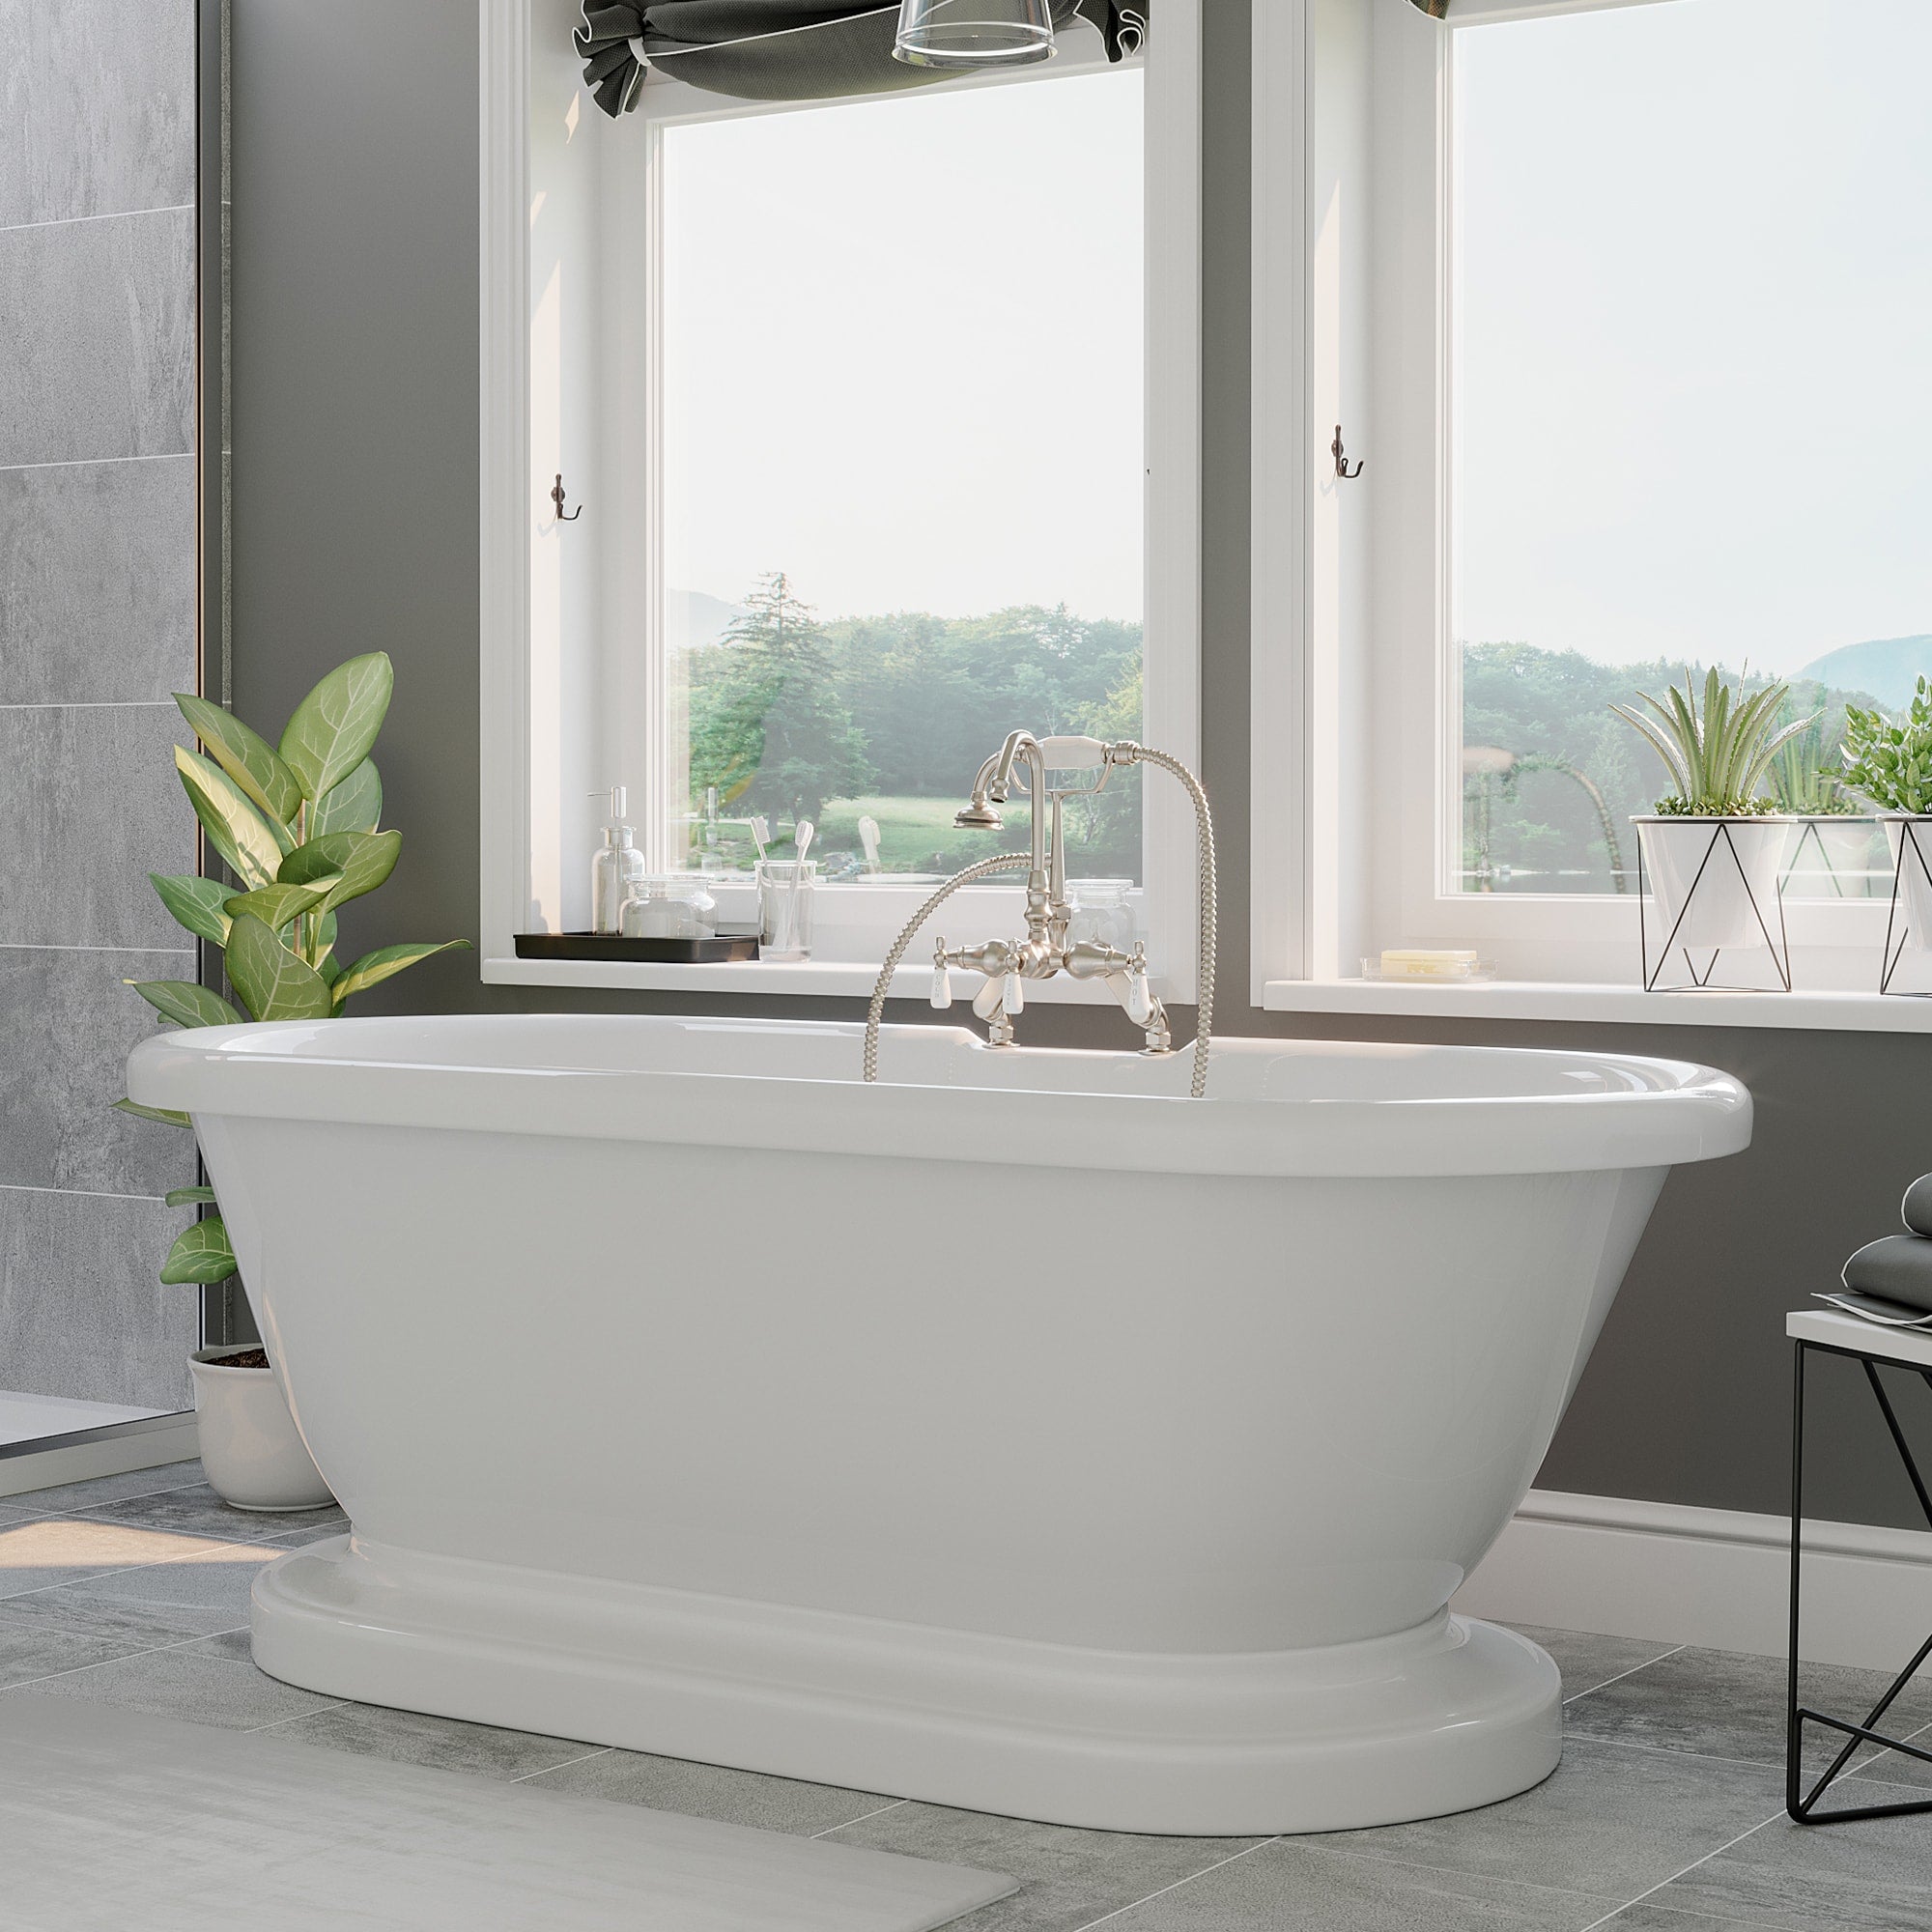 Cambridge Plumbing Double Ended Acrylic Pedestal Bathtub (White Gloss Finish) with Complete Plumbing Package - Brushed nickel tub filler with hand-held shower ADEP-684D-PKG-7DH - Vital Hydrotherapy